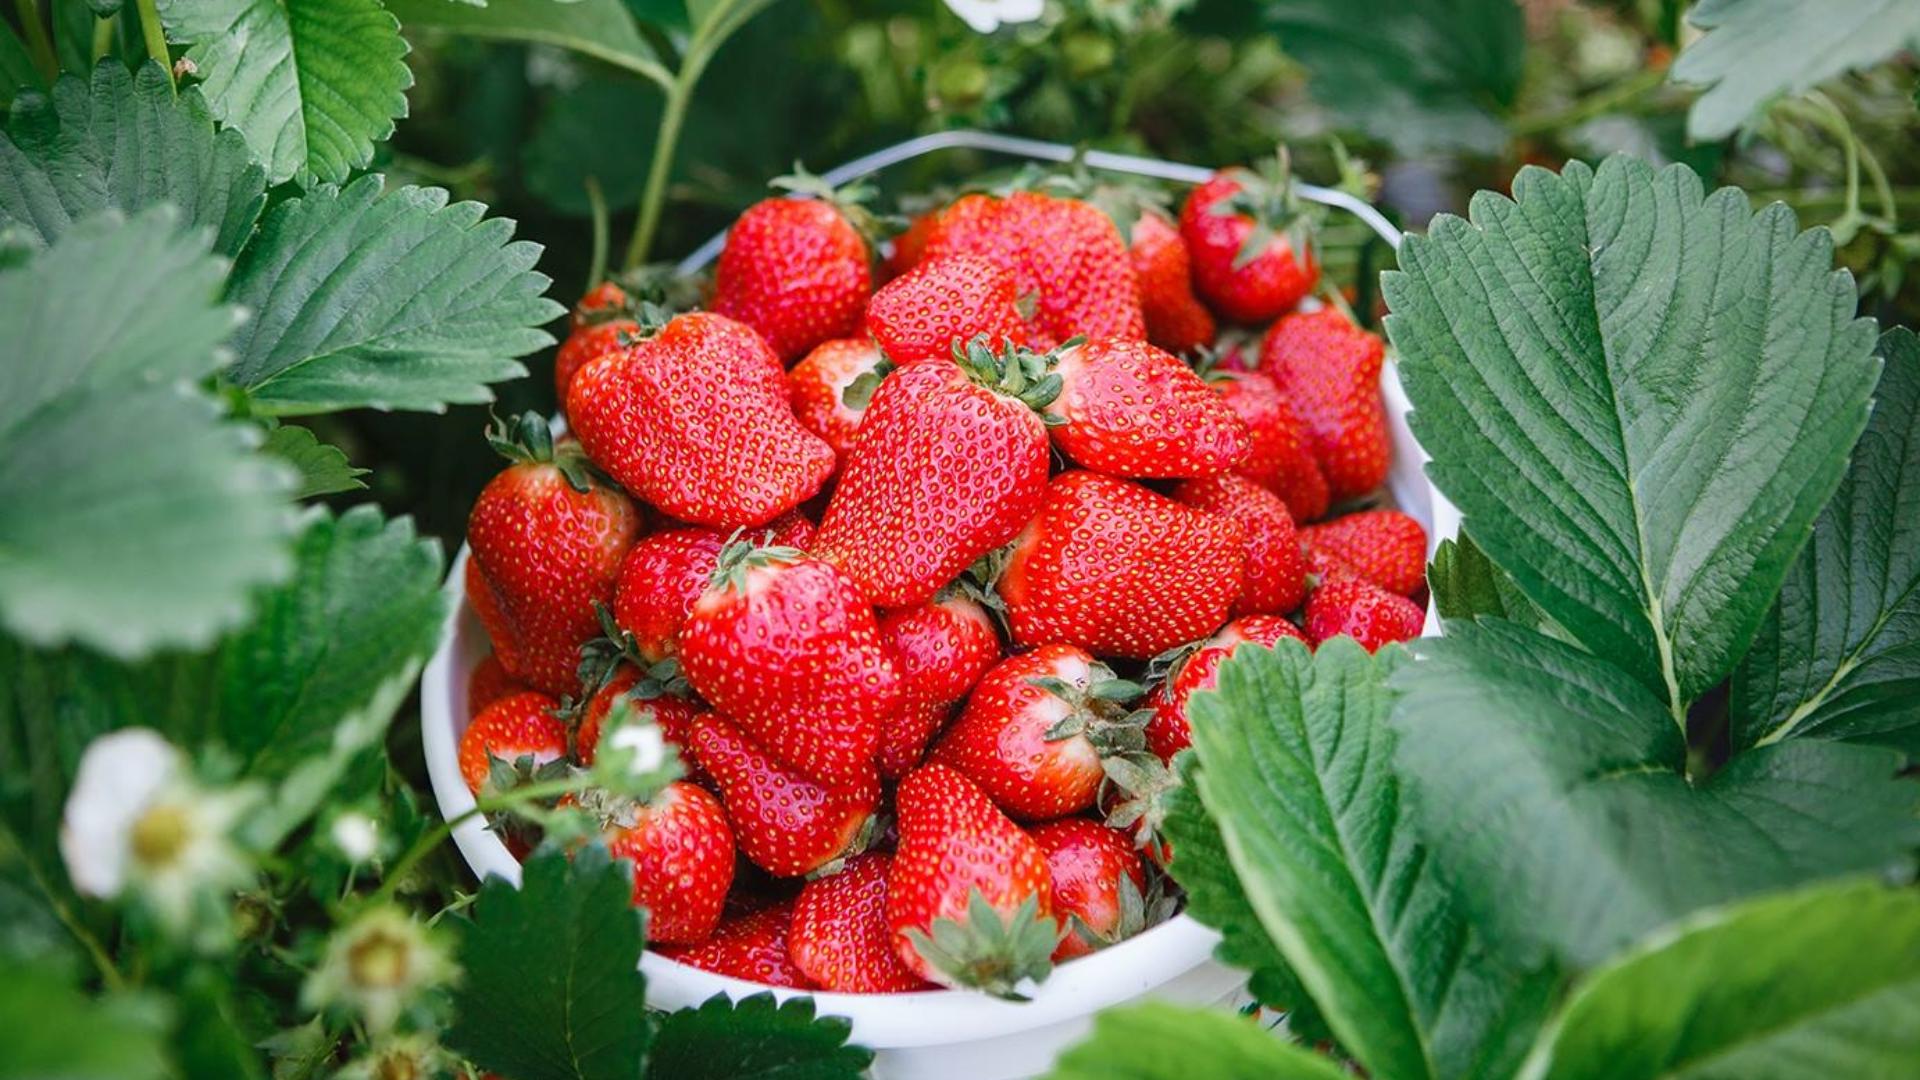 Christi Porter and Brianne Carey of the Wegmeyer Farm Foundation tell us about the Lincoln Strawberry Festival in Loudoun County, May 18-19, 2024.